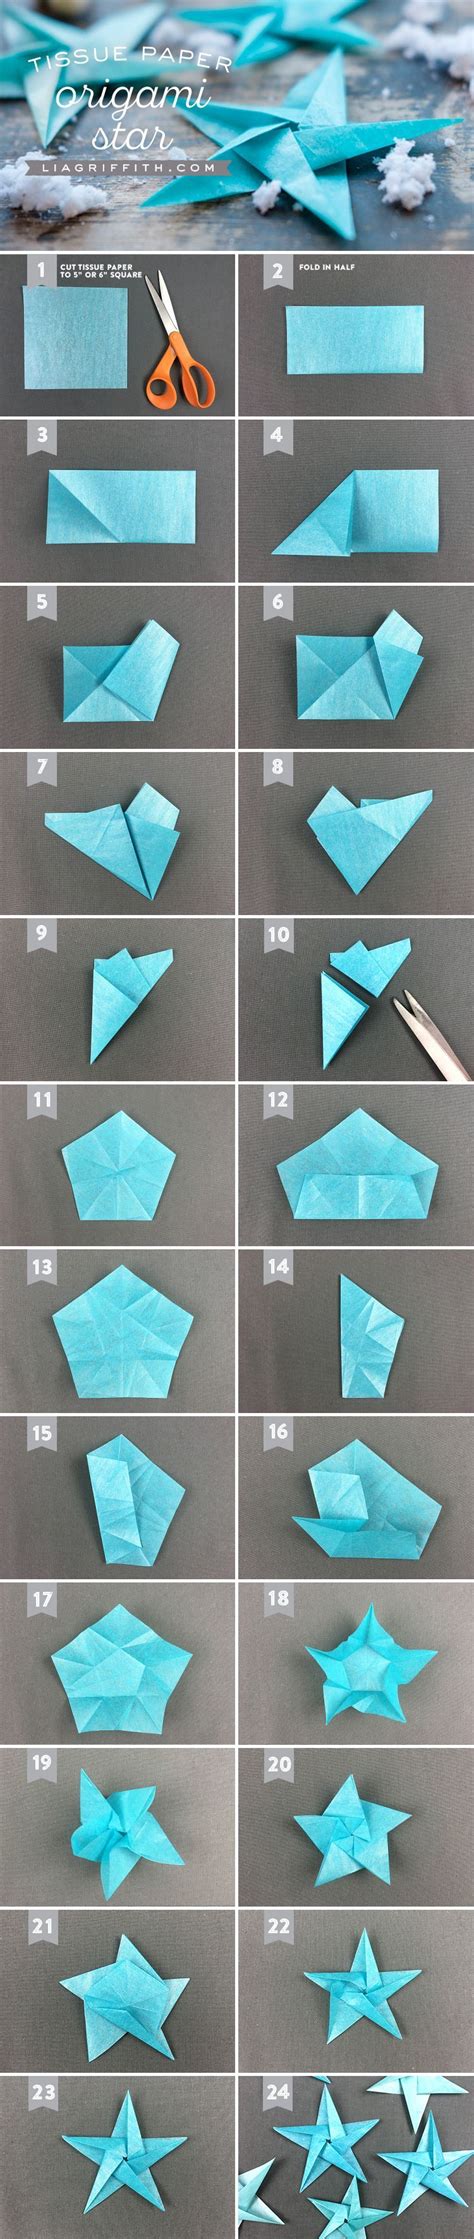 With origami, practice makes perfect.merry christmas to all you origami lovers! How To Make A Origami Christmas Star With Money / Origami Instruction:happy star | web wanderers ...